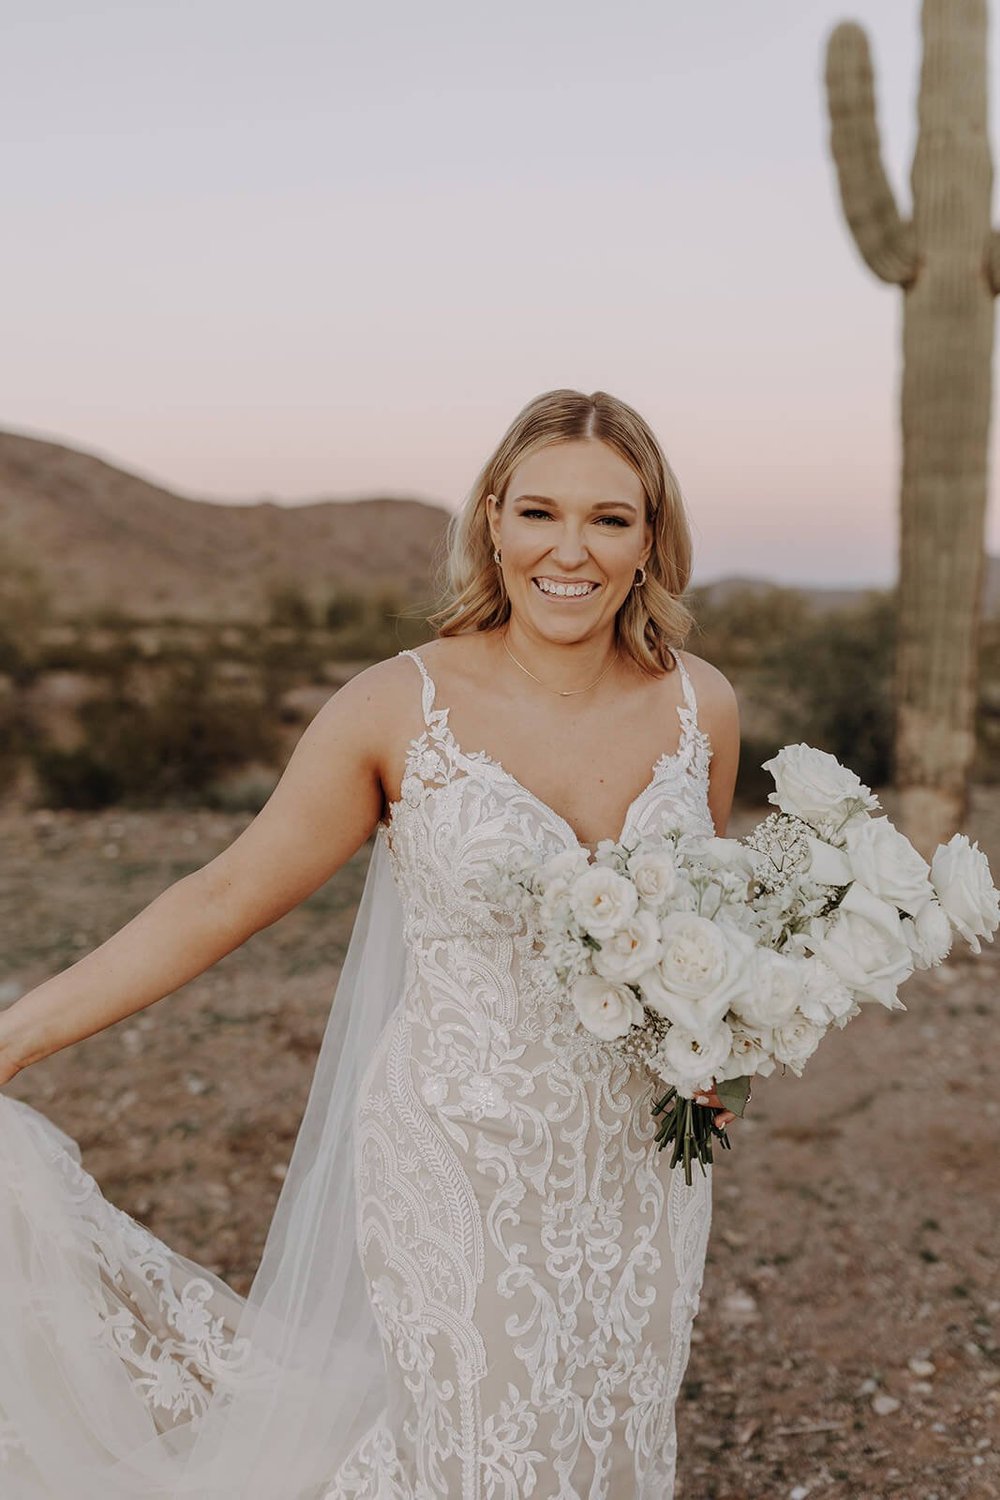 Bride holding bouquet of white roses in the desert with cactus in the background